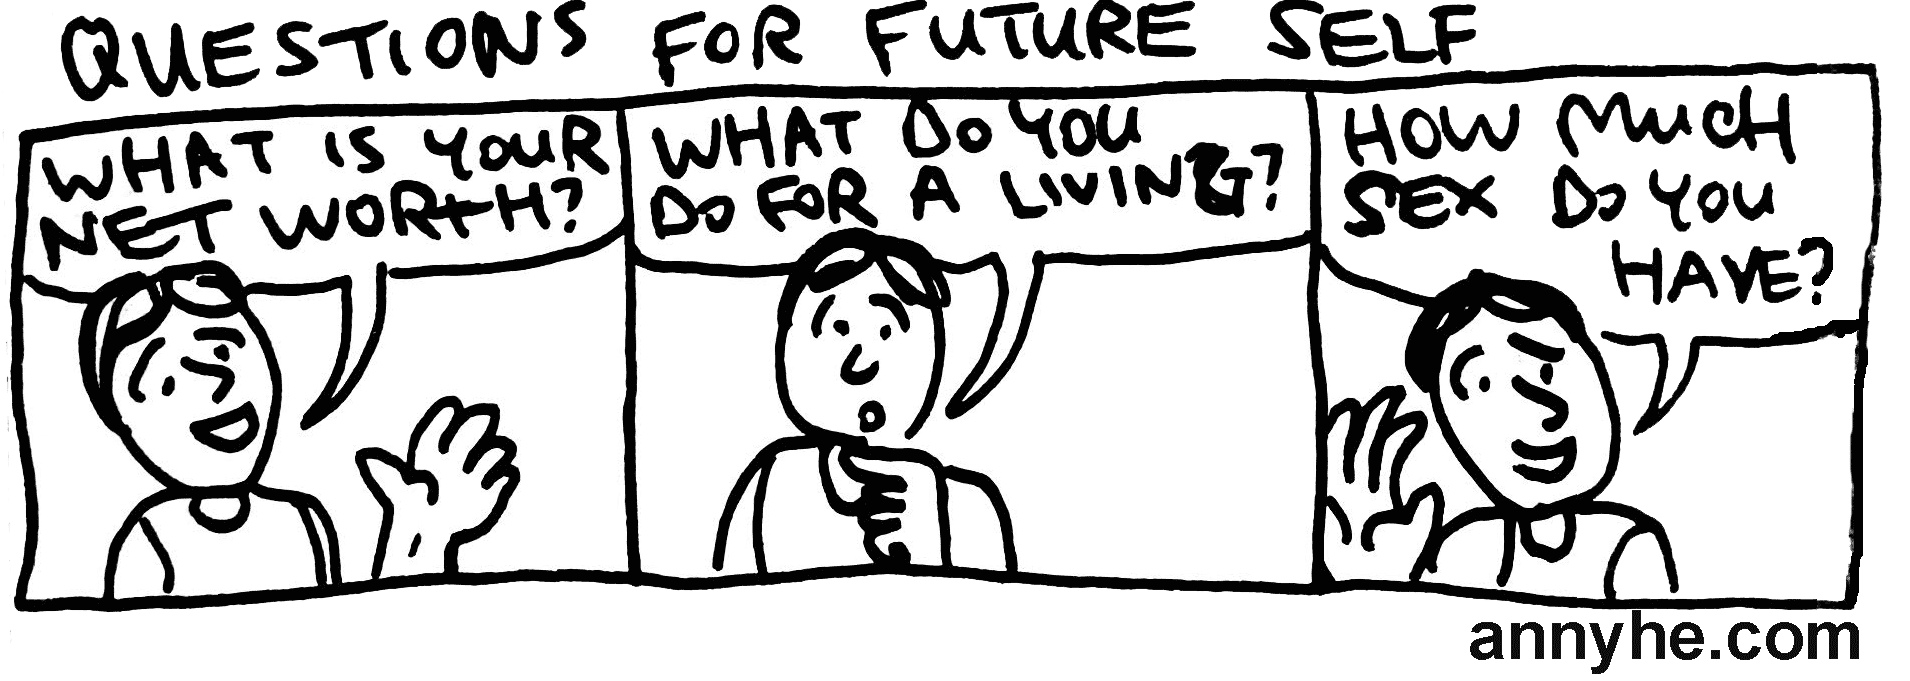 Questions to the Future Self